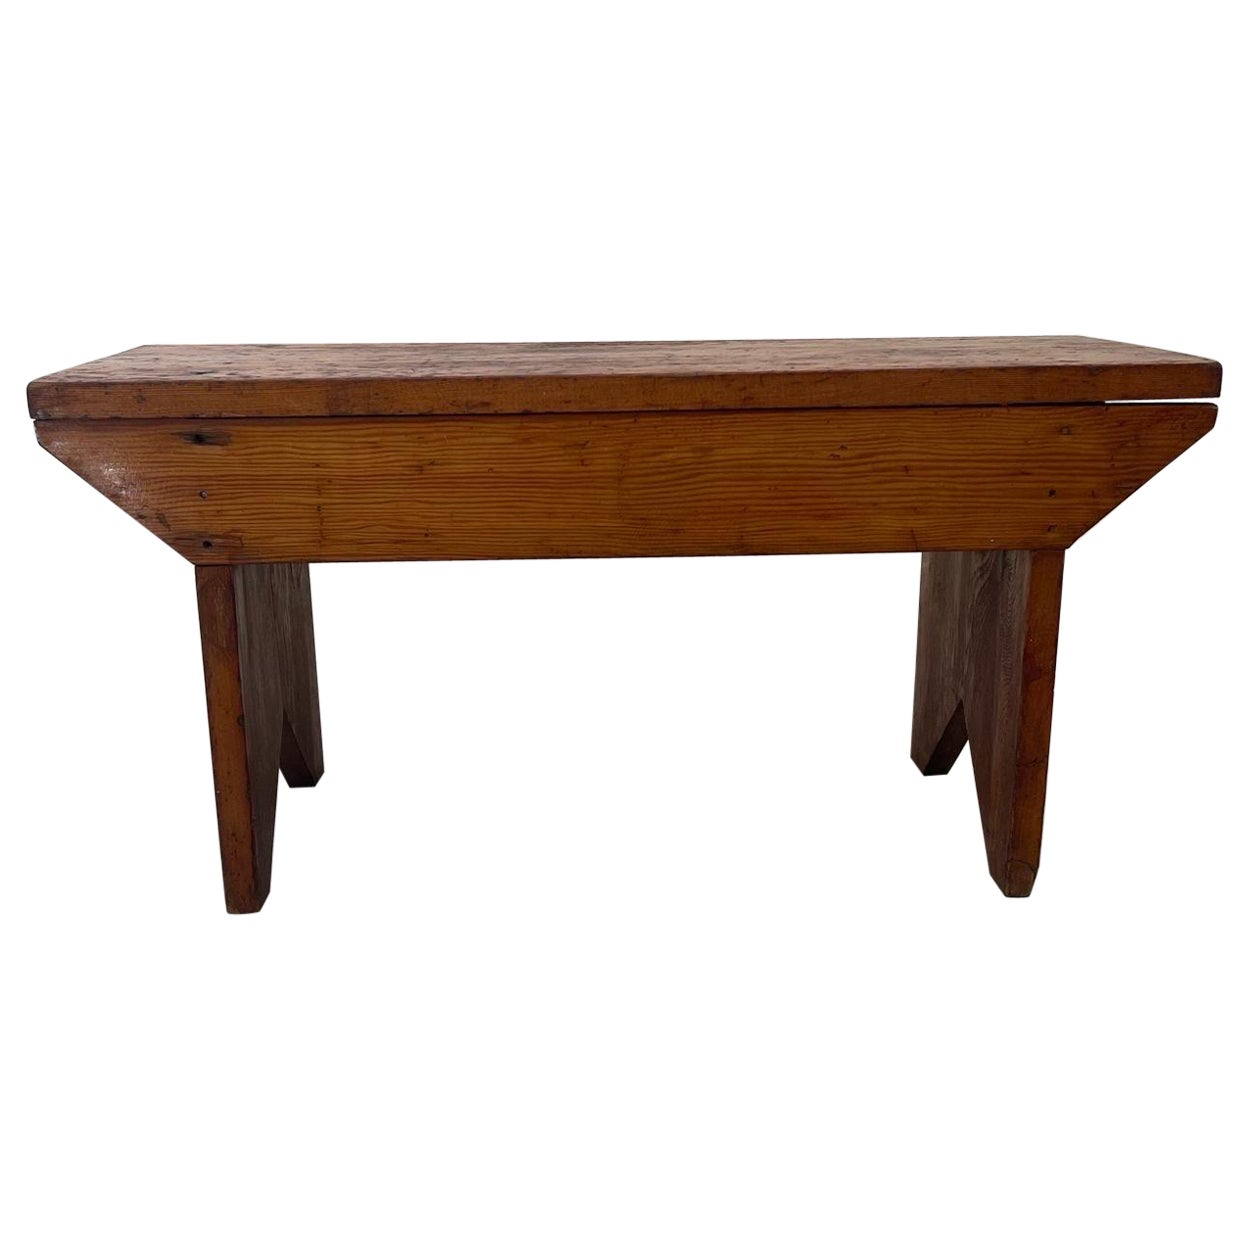 Vintage Handmade Primitive Arts and Crafts Style Wooden Petite Bench. For Sale